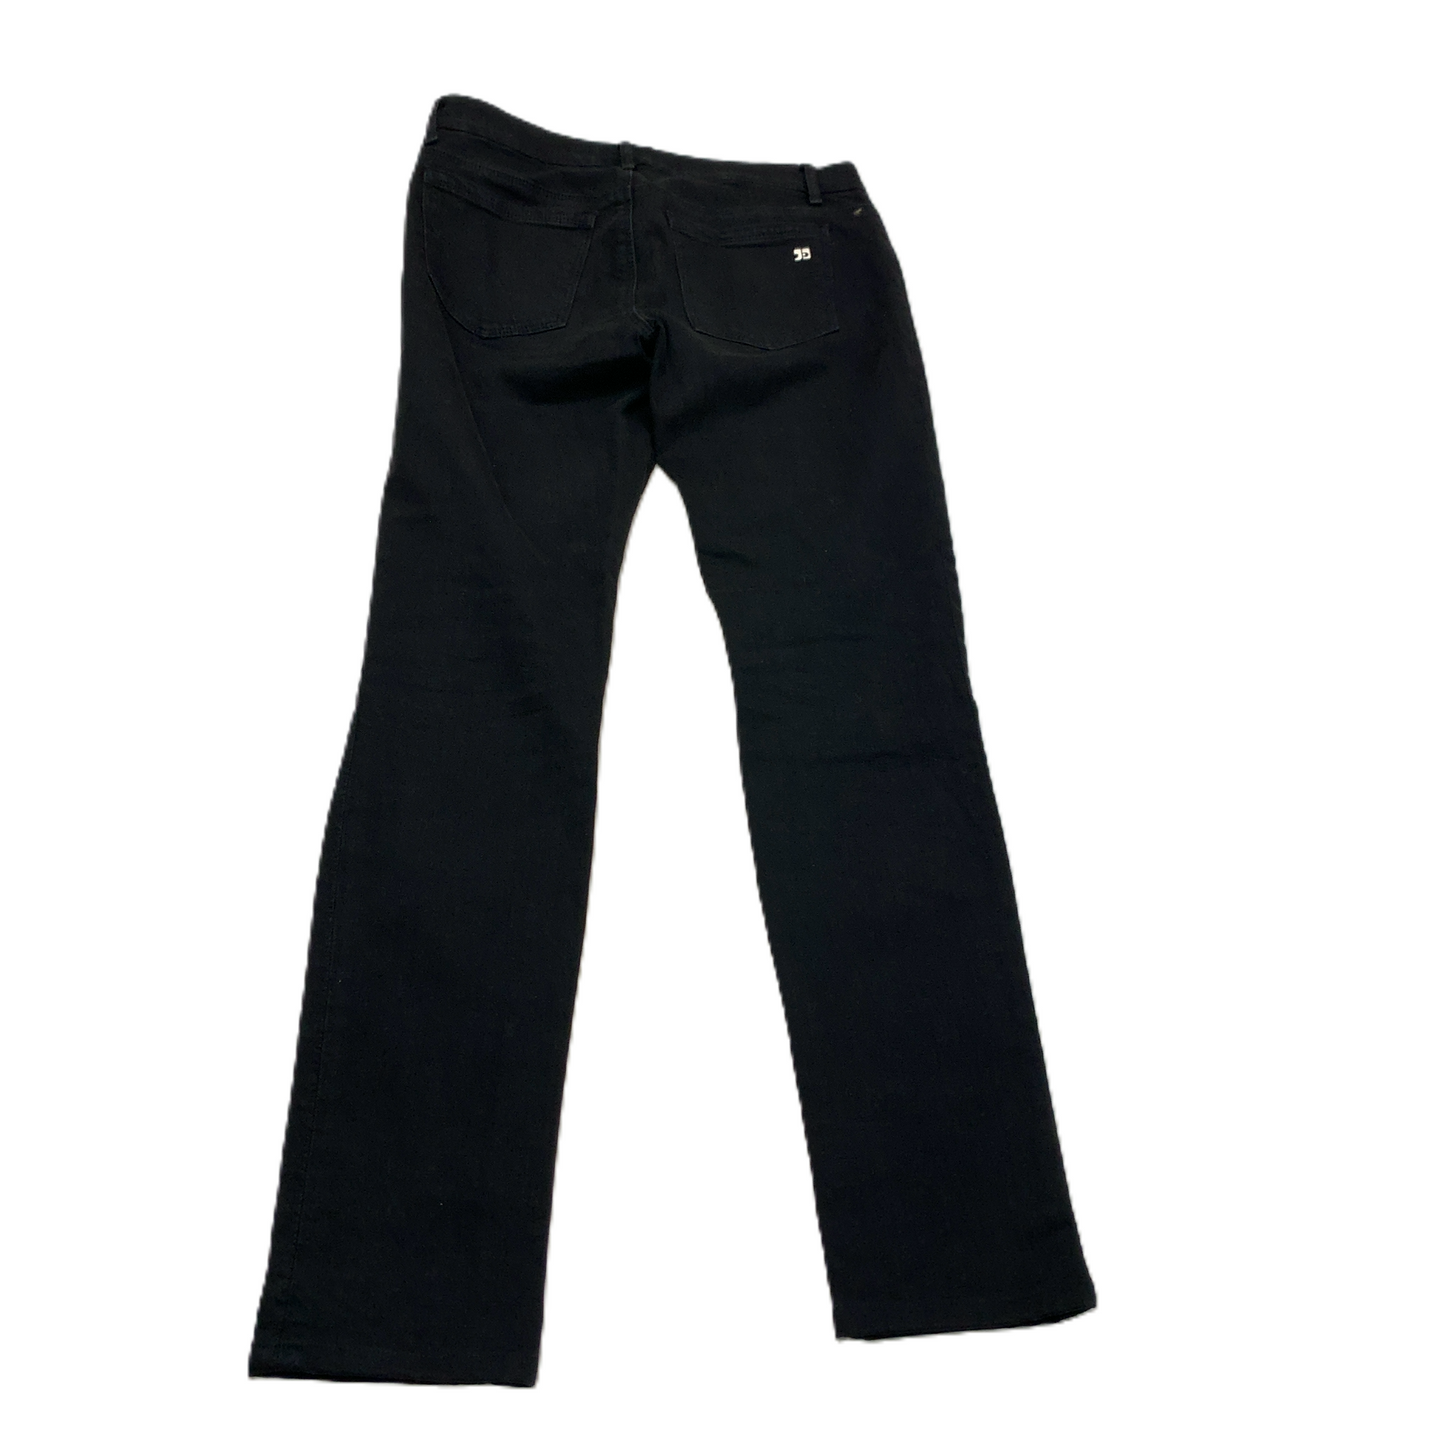 Pants Designer By Joes Jeans  Size: 2